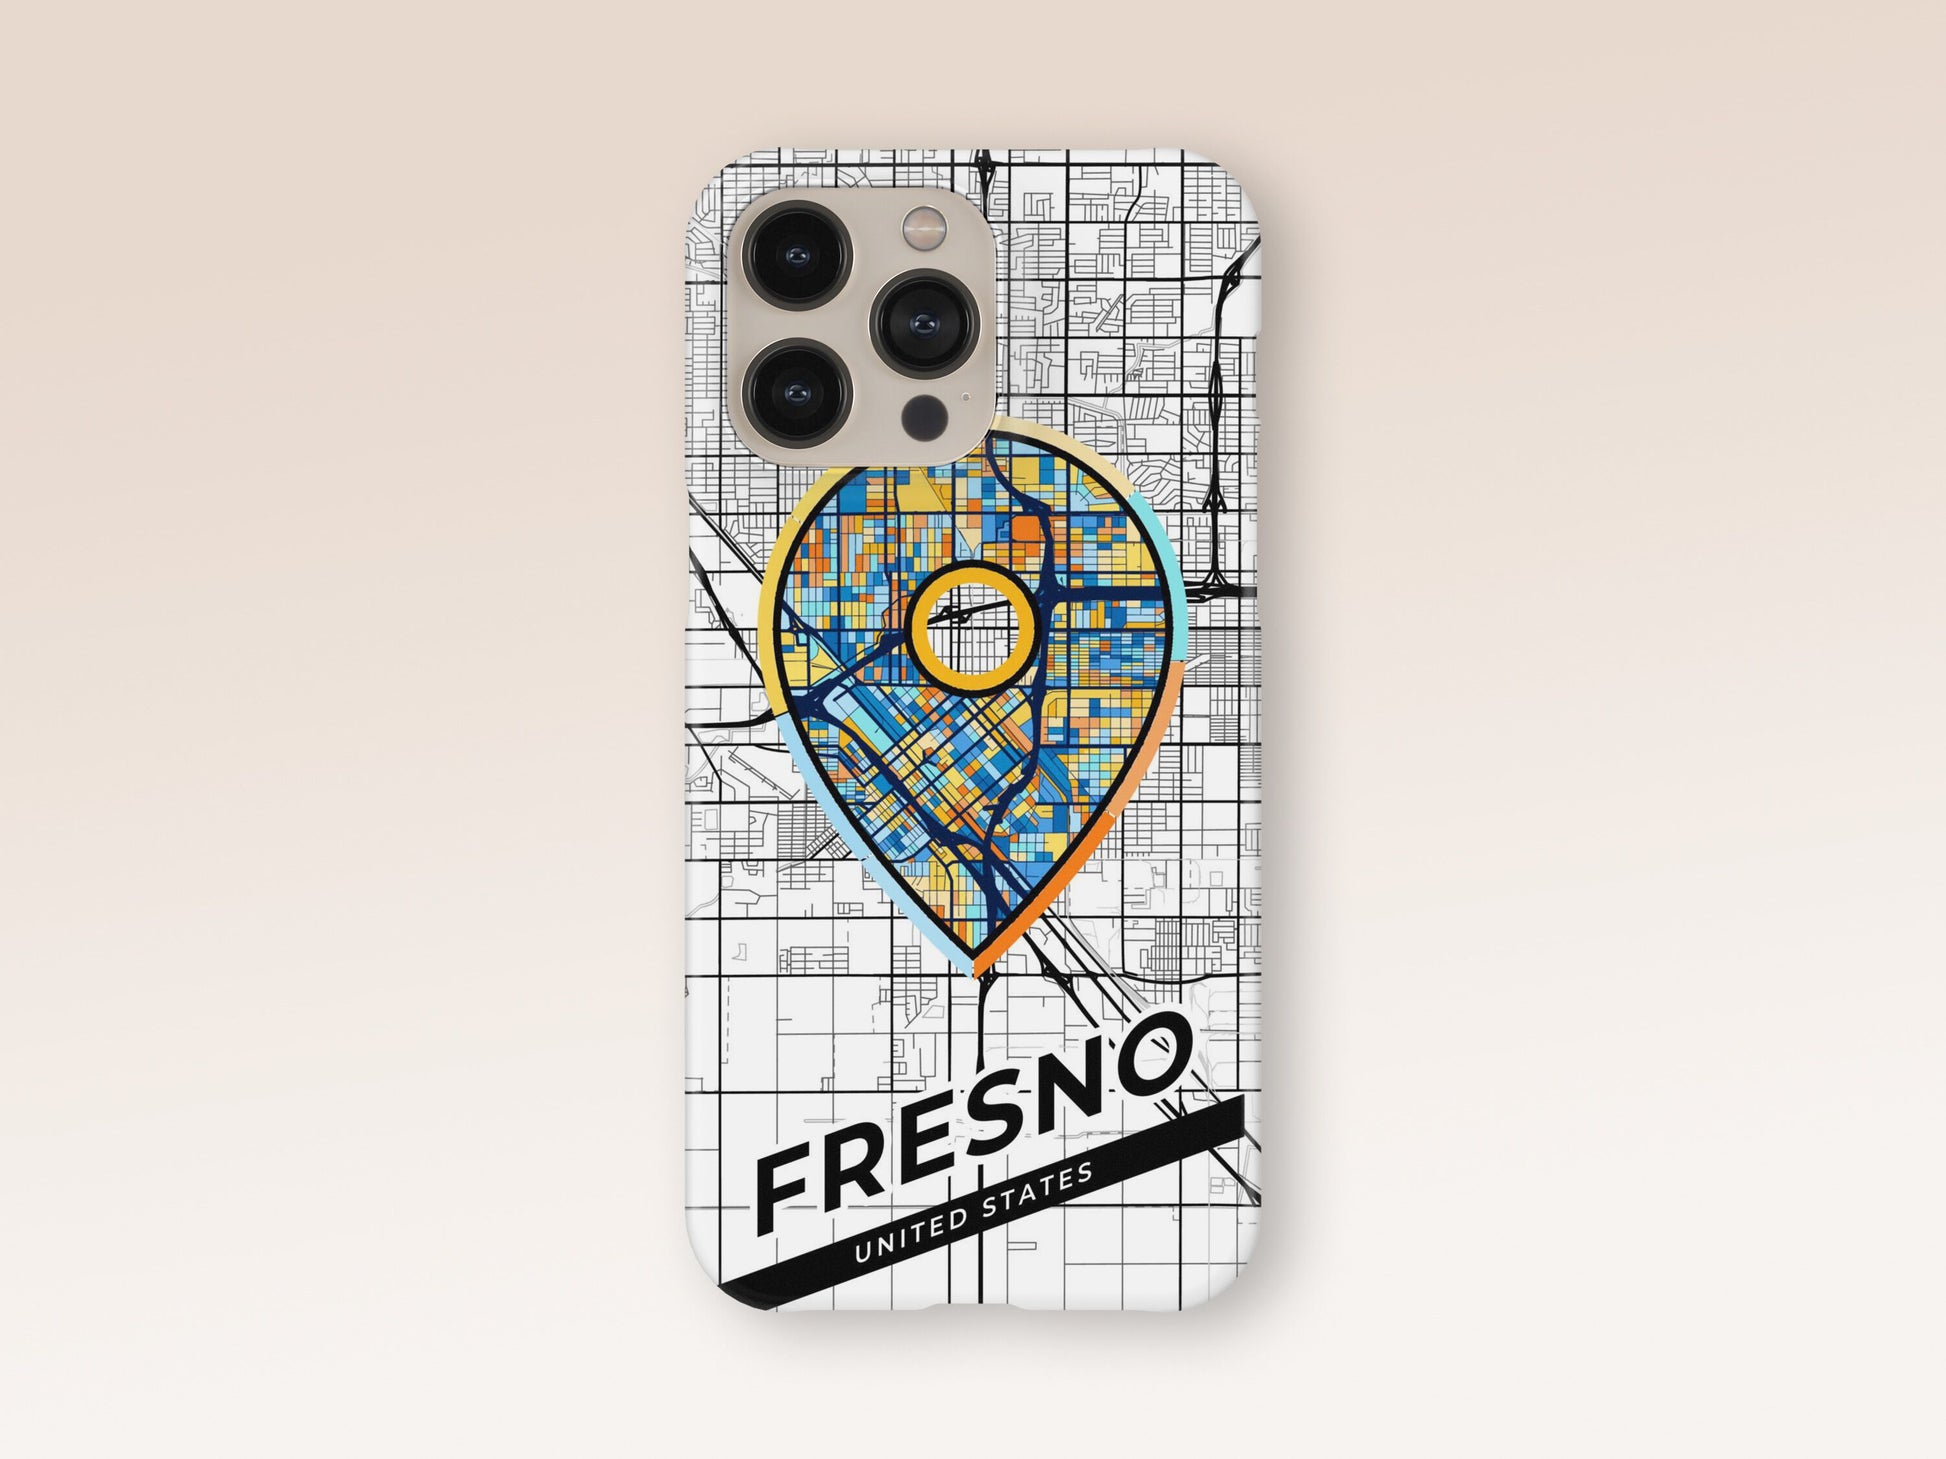 Fresno California slim phone case with colorful icon. Birthday, wedding or housewarming gift. Couple match cases. 1